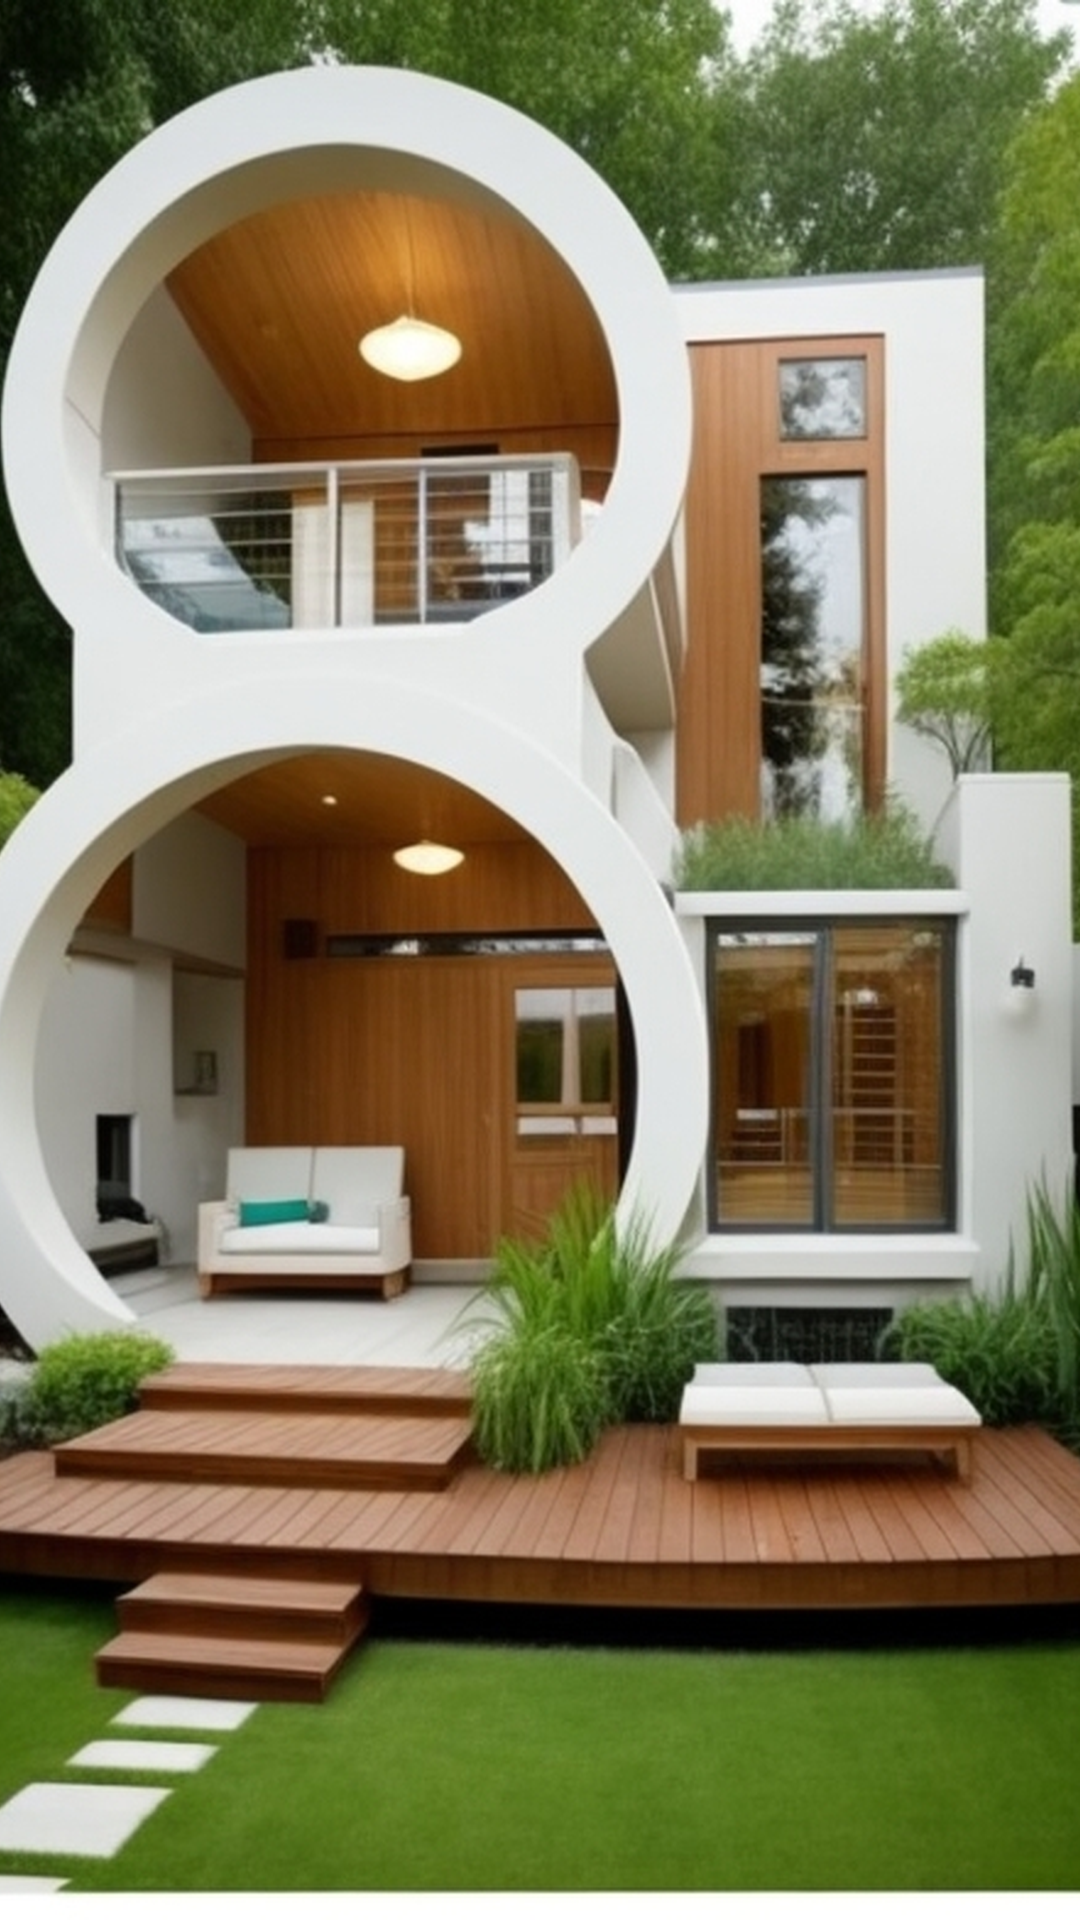 Unleash Your Imagination - Creative One Story House Designs